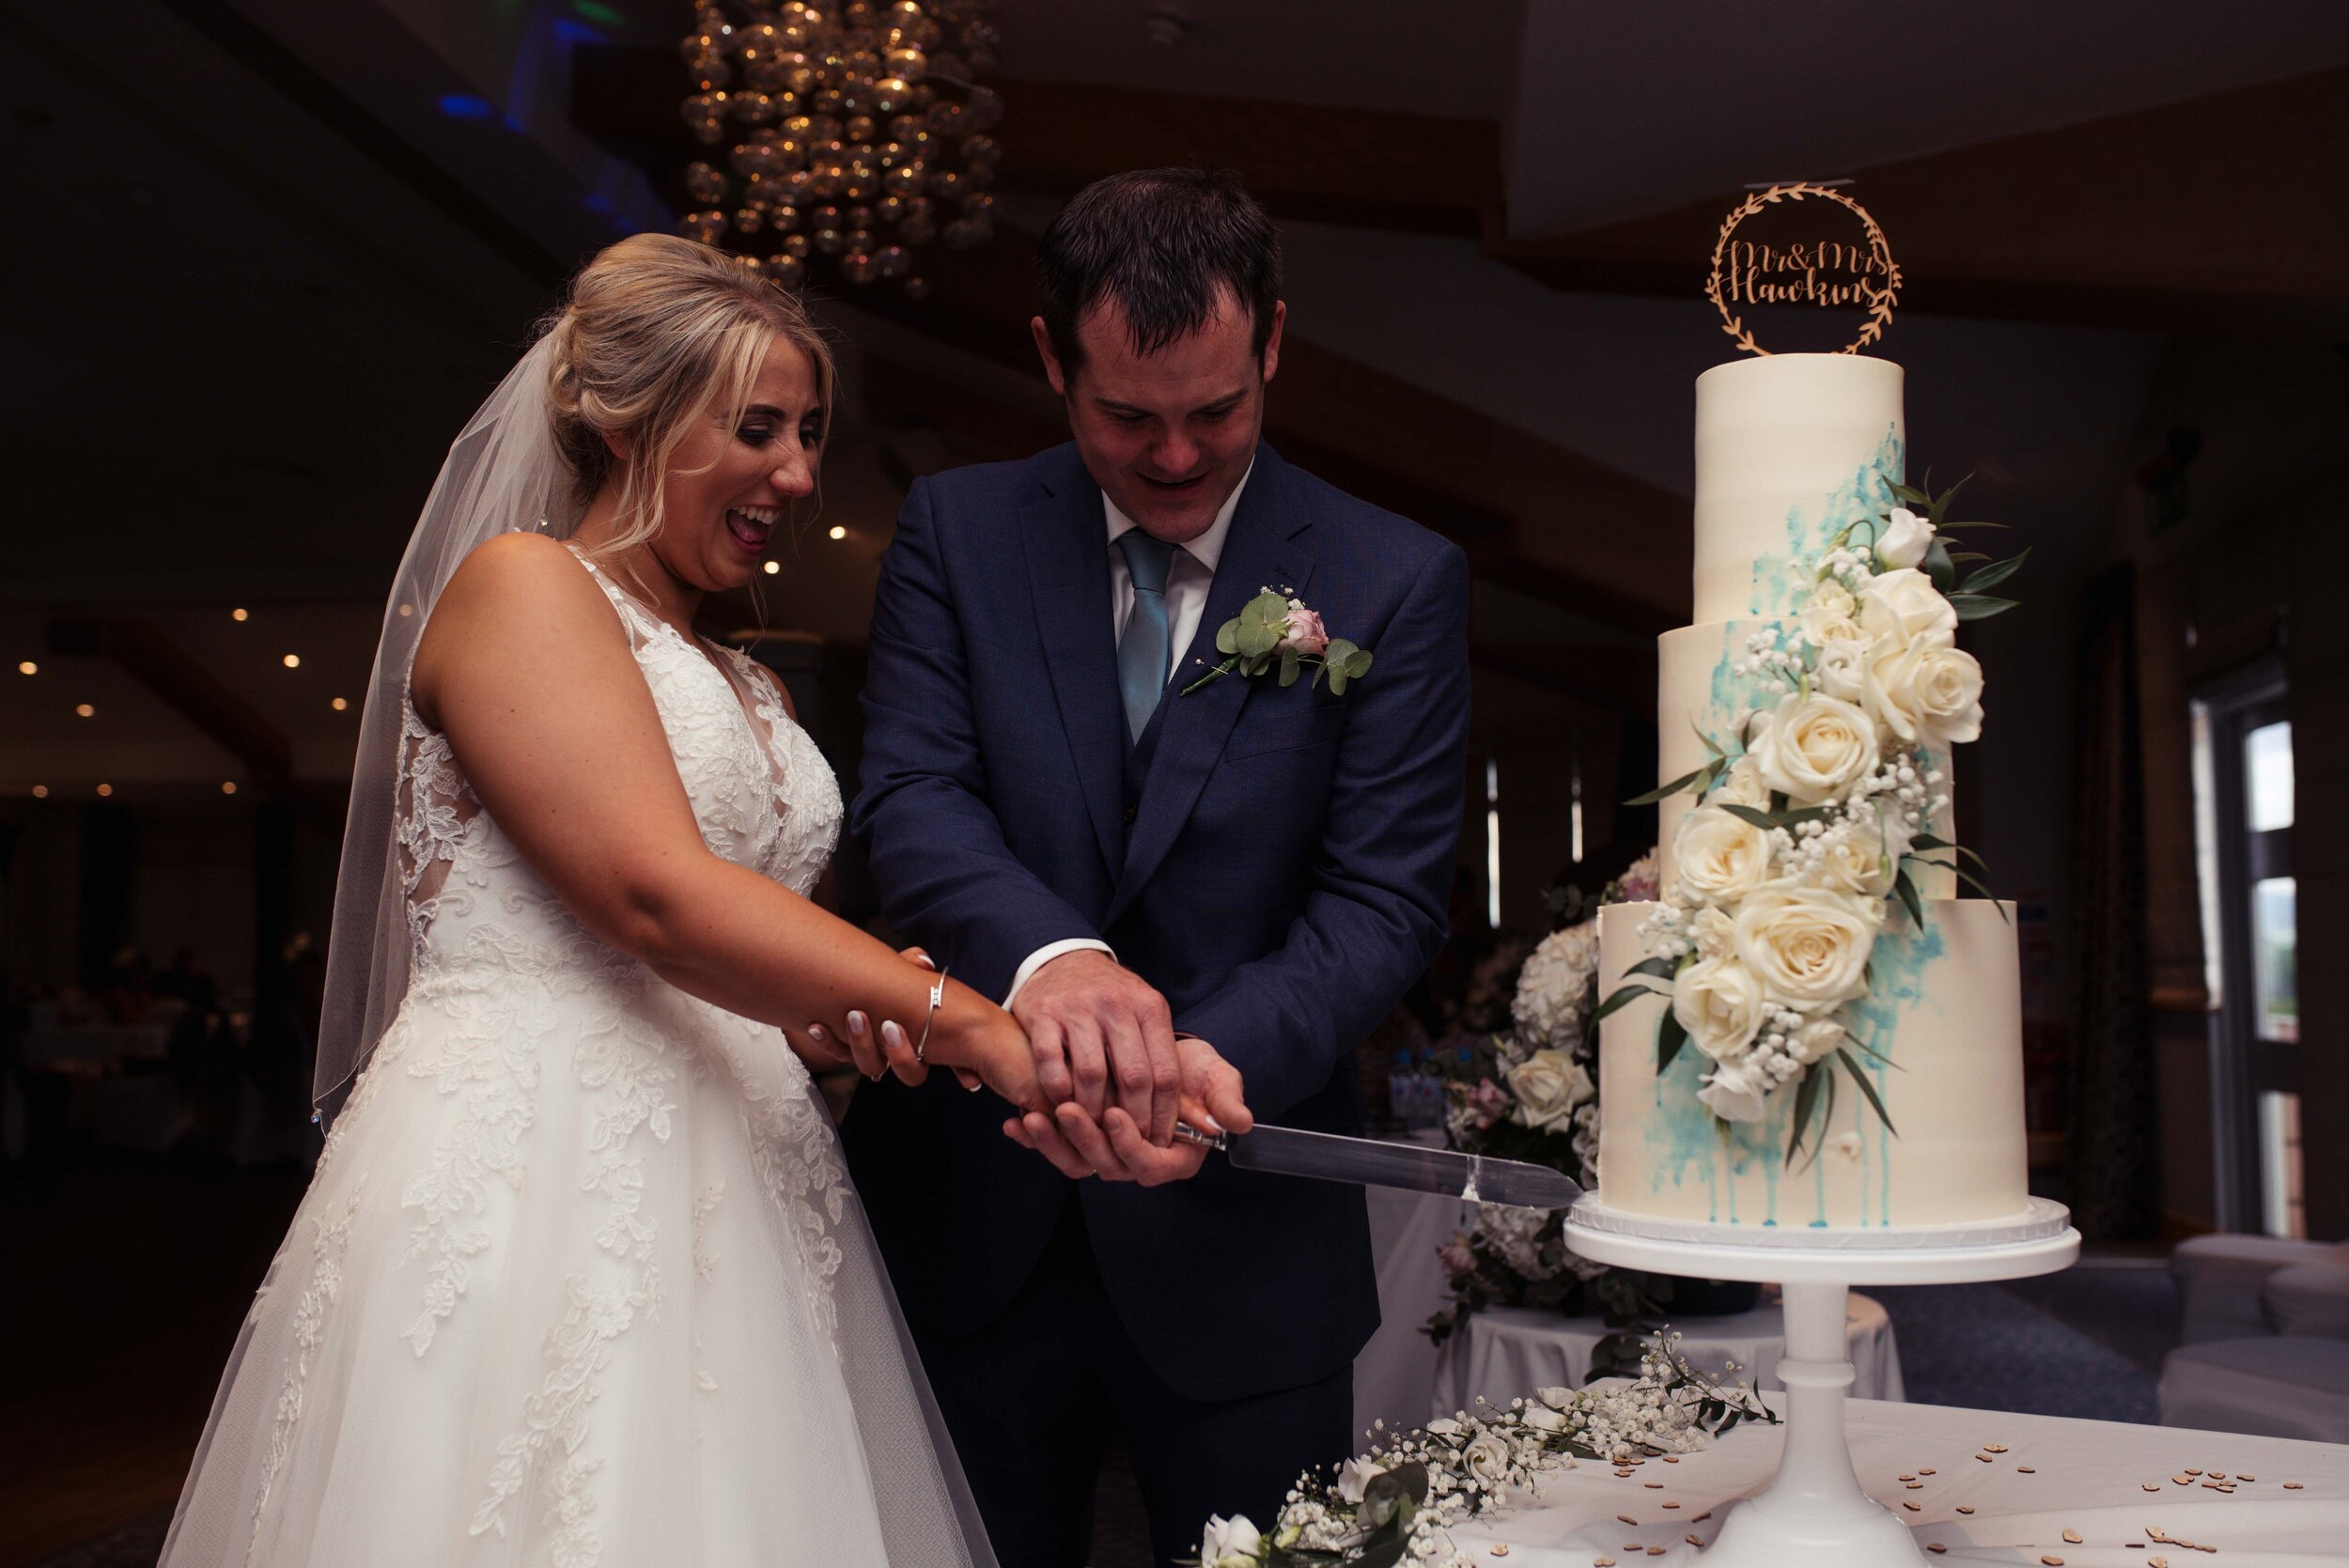 The bride and groom cut their gorgeous wedding cake